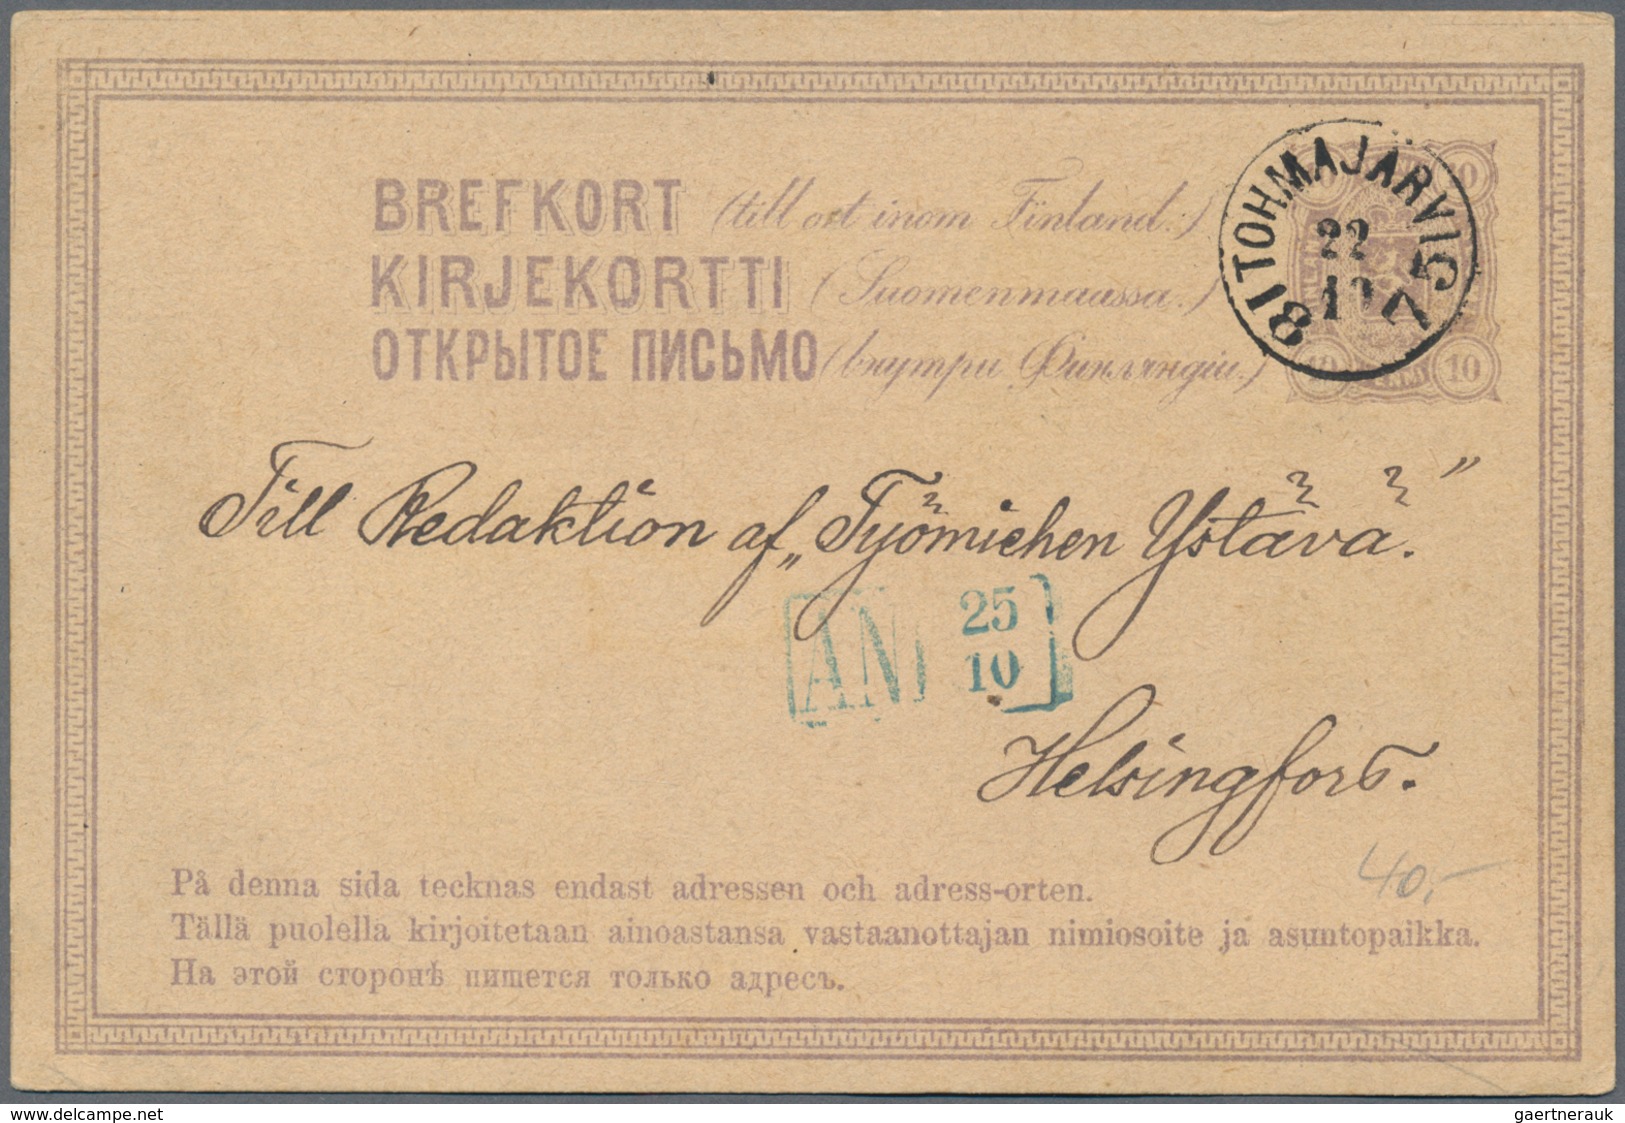 Finnland: 1860/1970, 626 covers and cards, starting with early stationeries, letters and parcel card